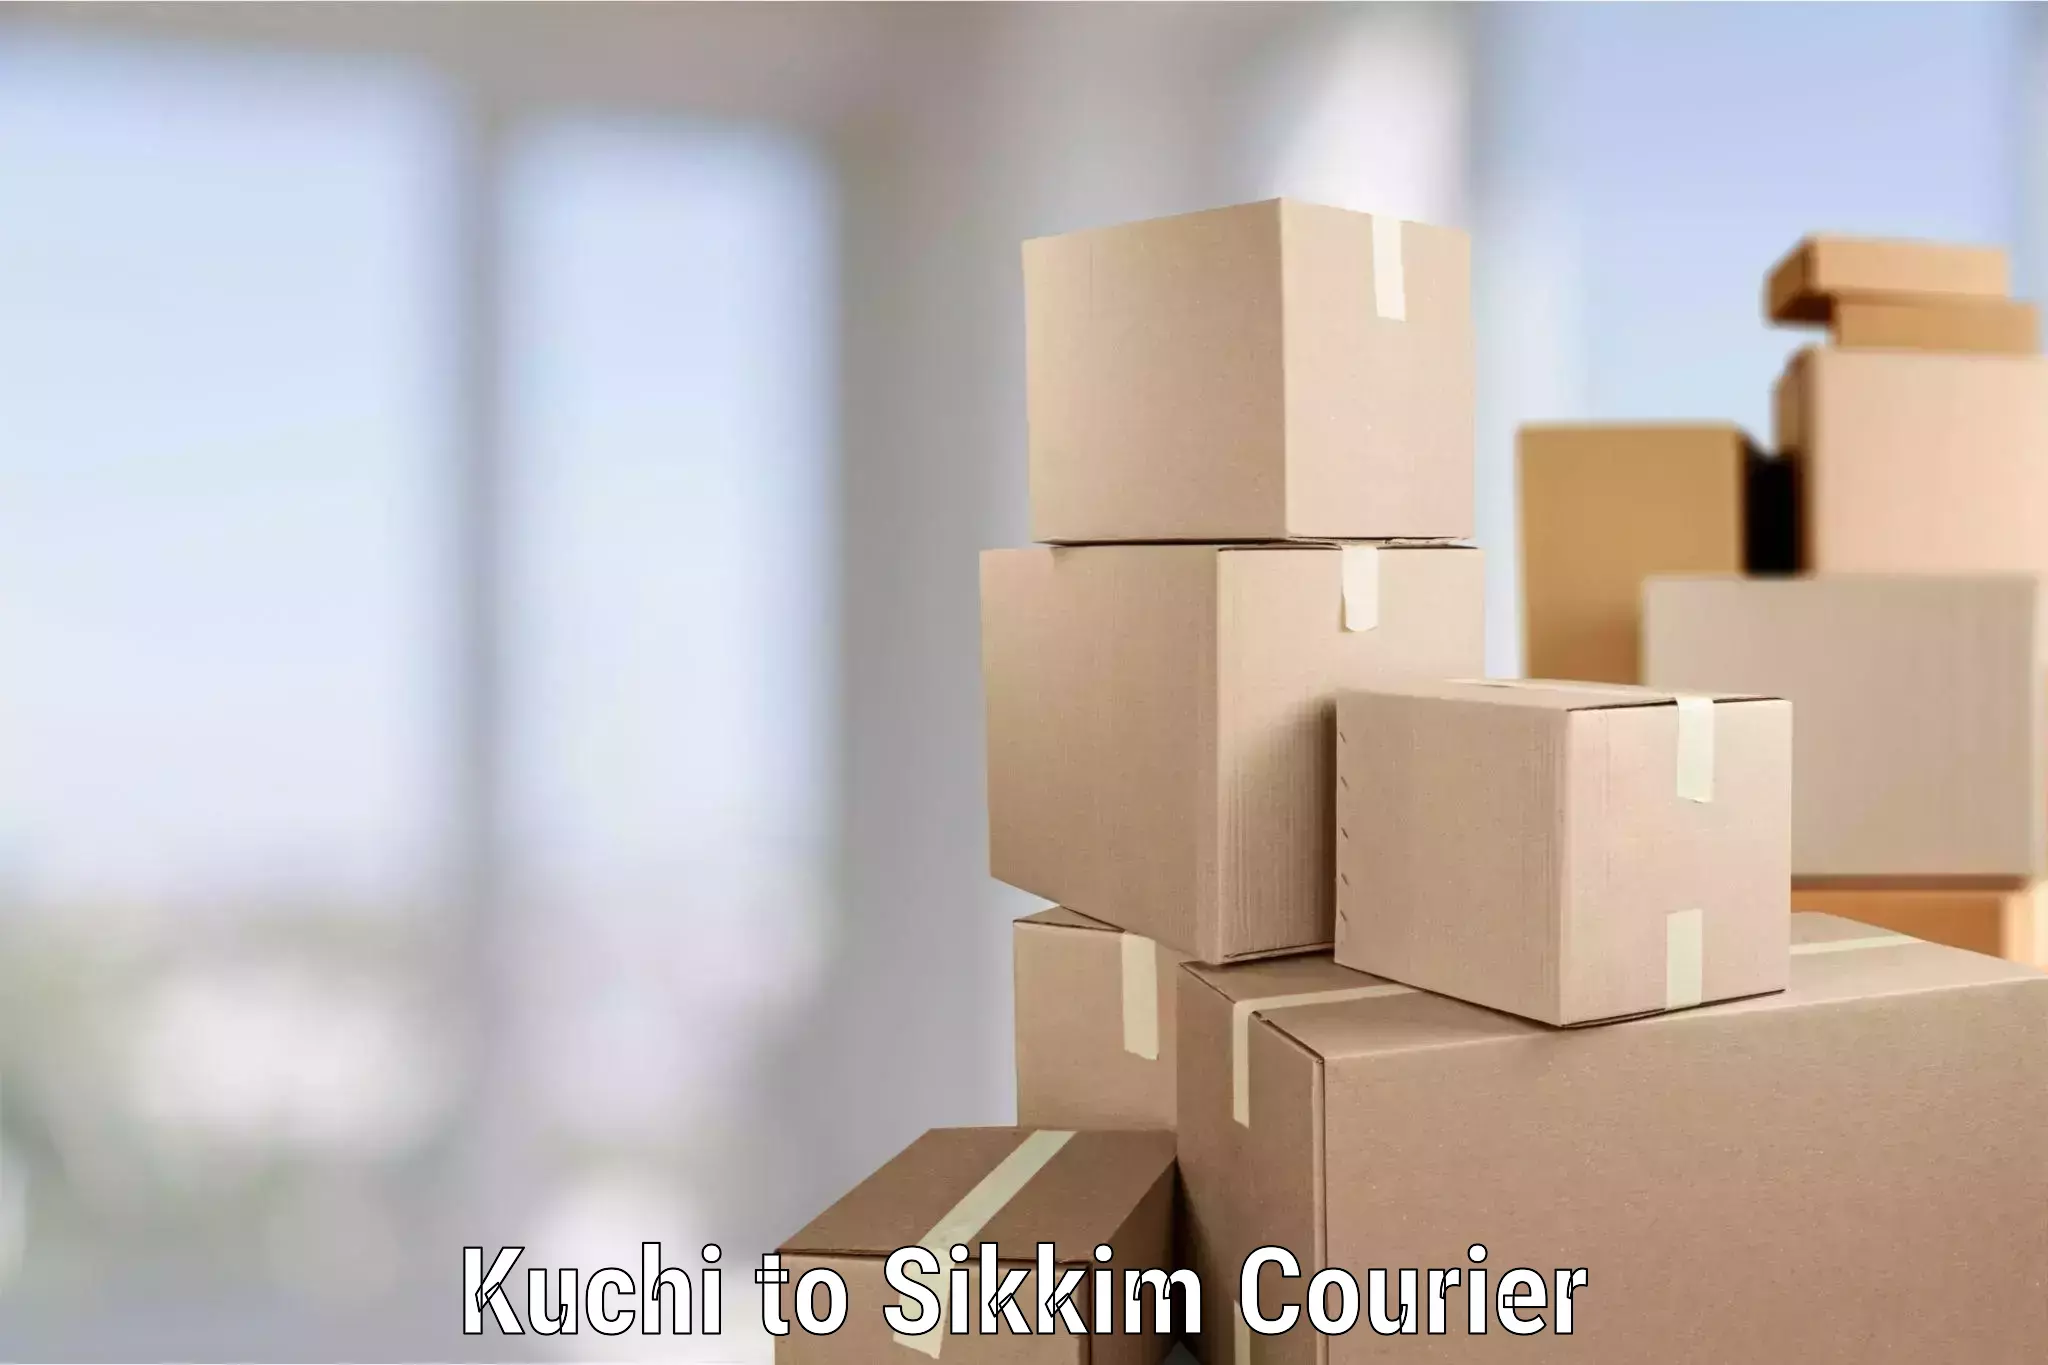 Trusted moving company Kuchi to Pelling